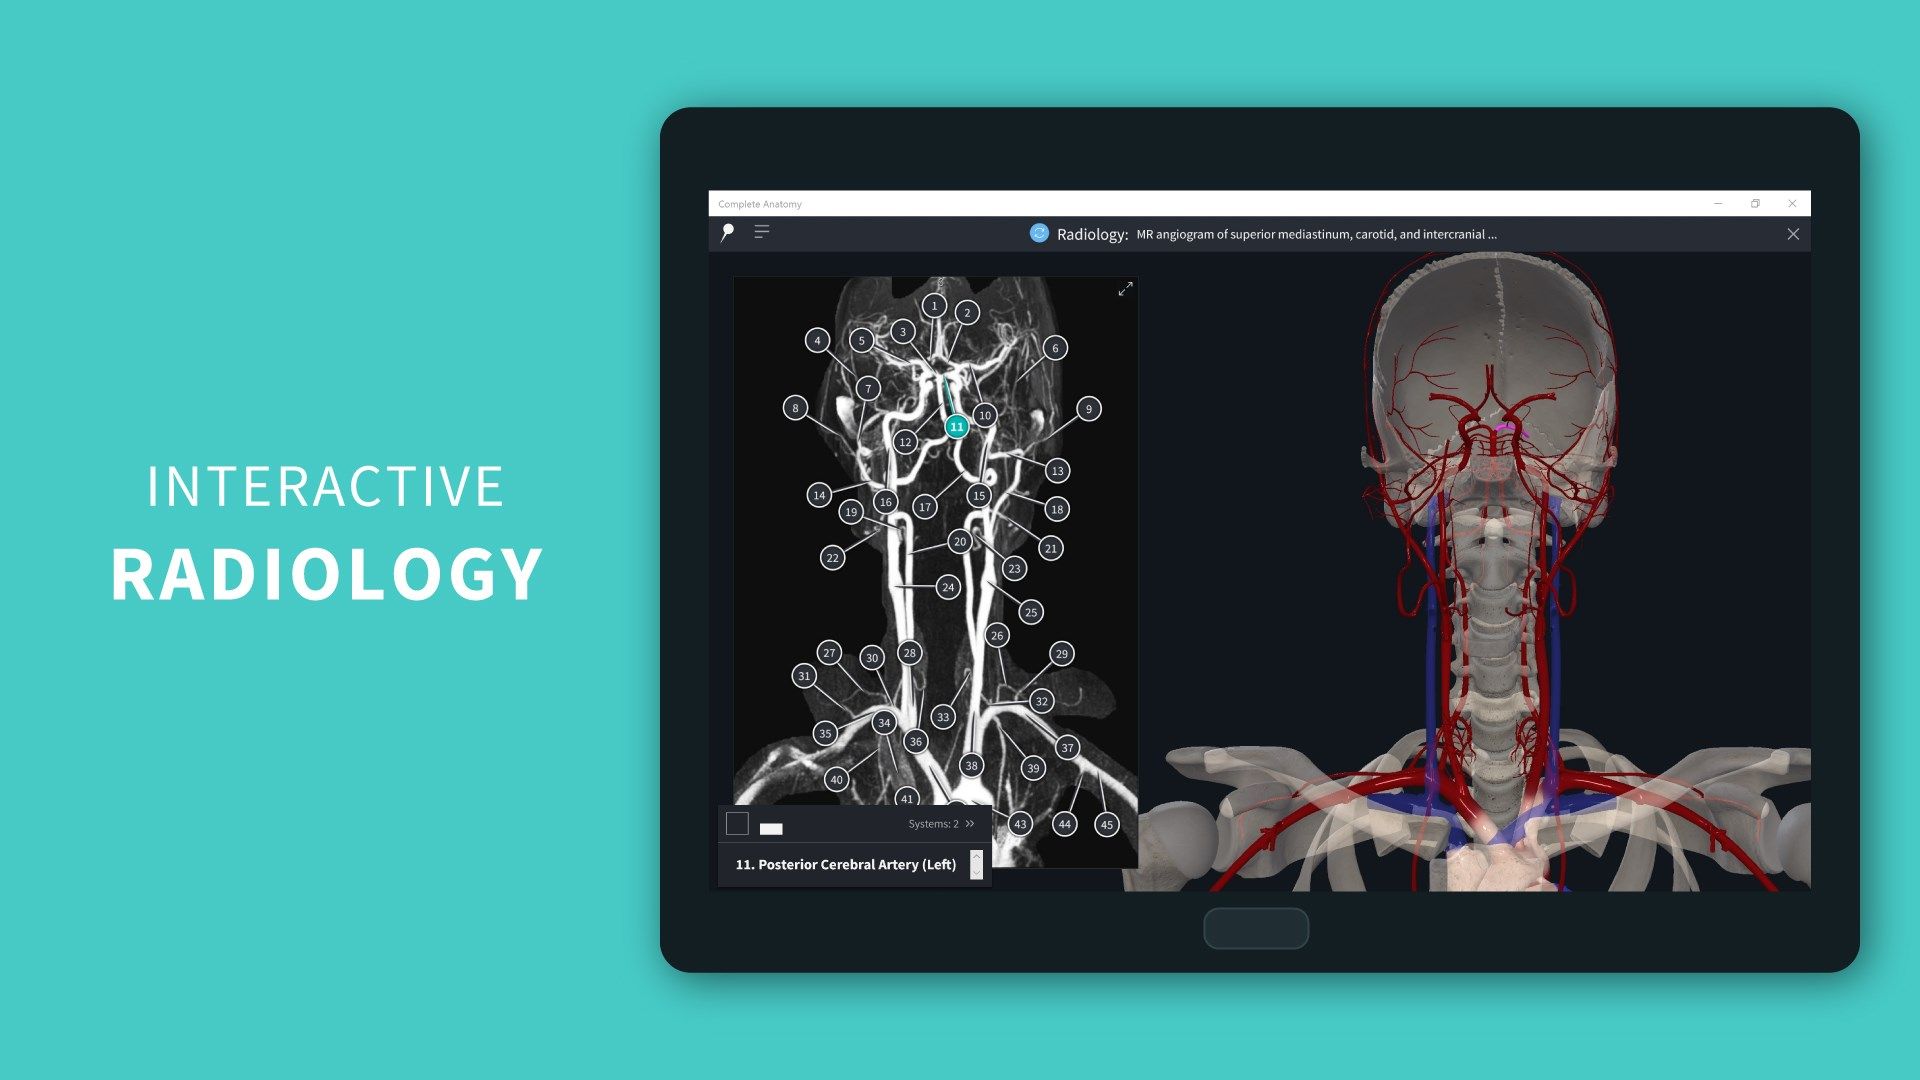 Correlate interactive radiological images with the 3D model